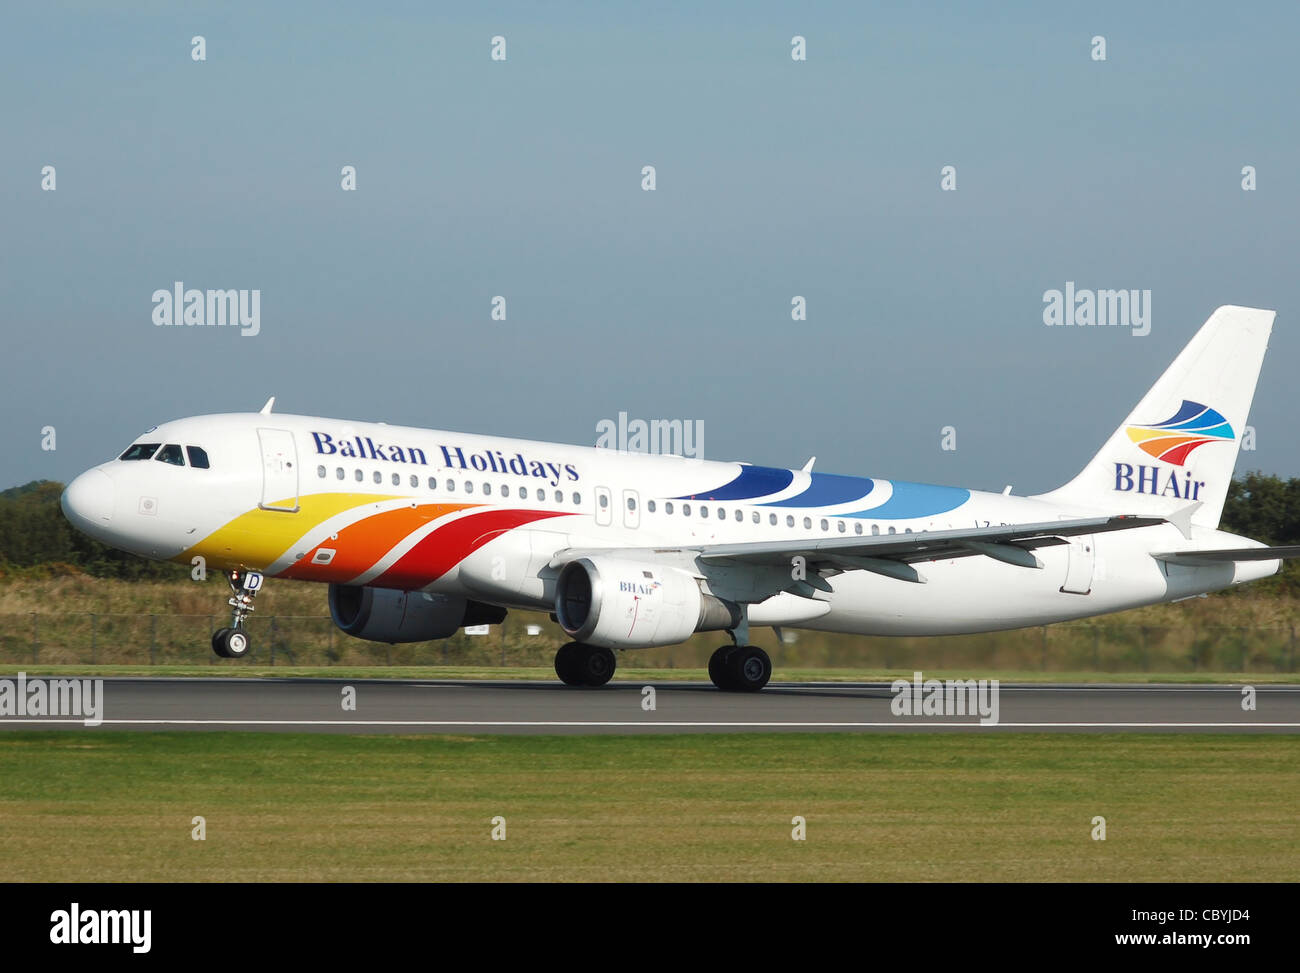 BH Air Airbus A320-200 (LZ-BHD) takes off at Manchester Airport, England. Stock Photo